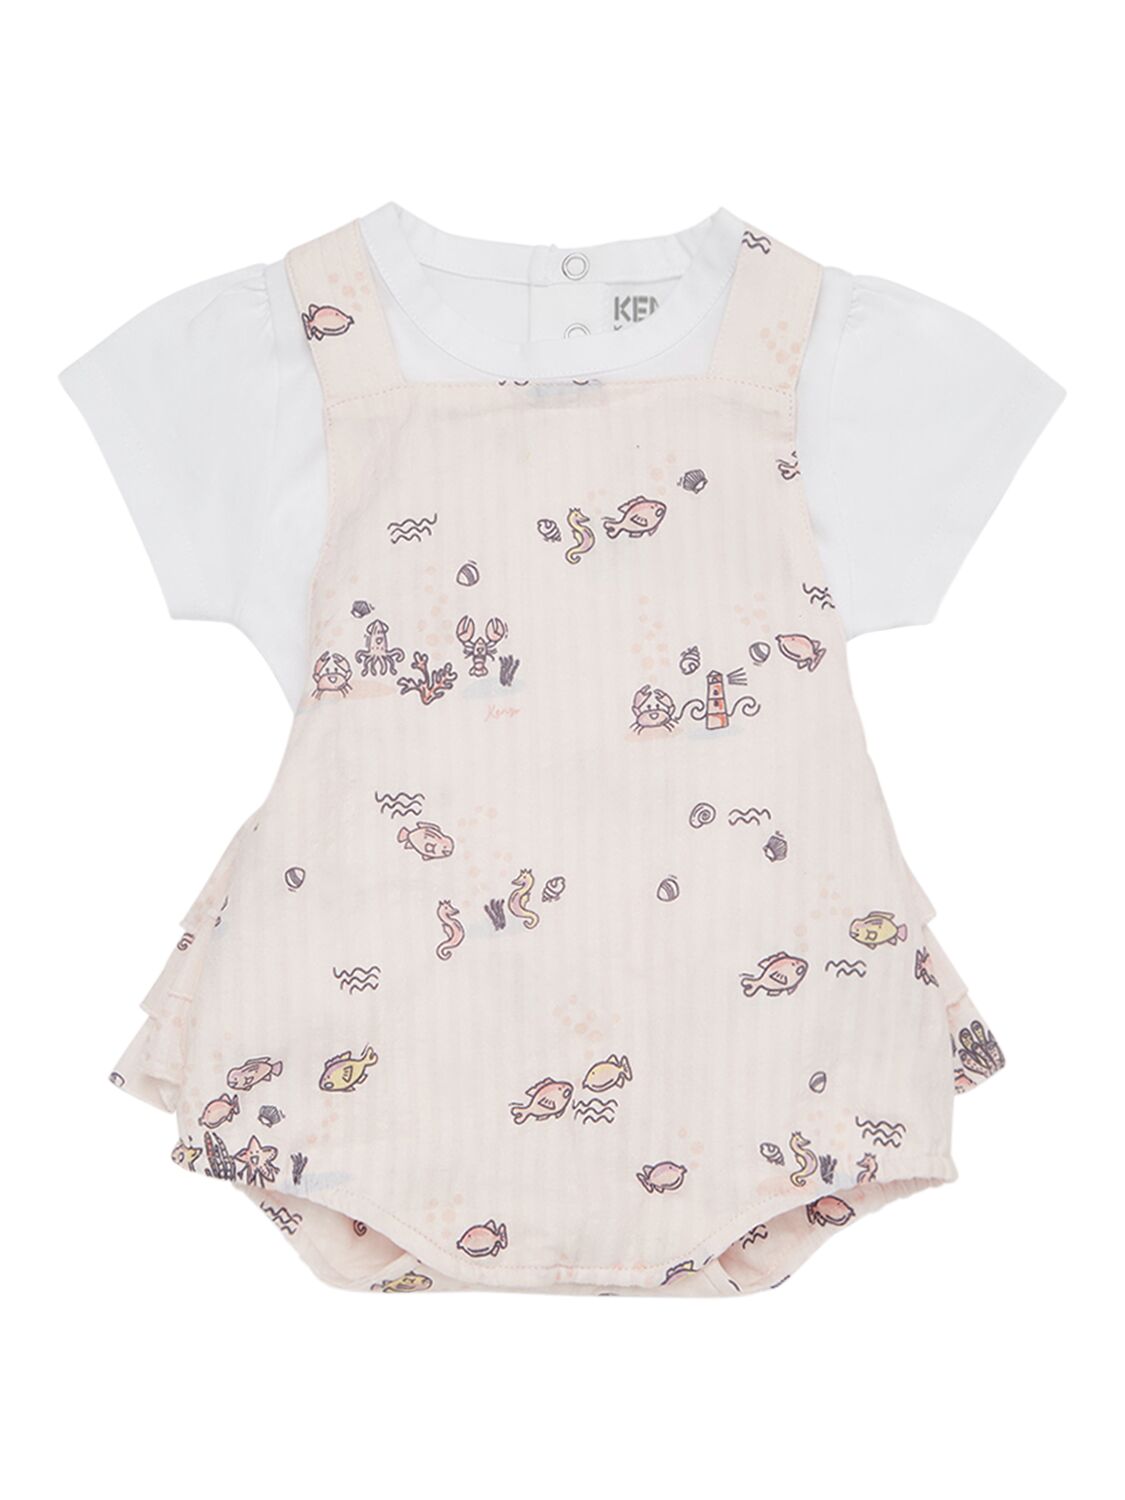 Kenzo Babies' Printed Cotton T-shirt & Romper In Pink